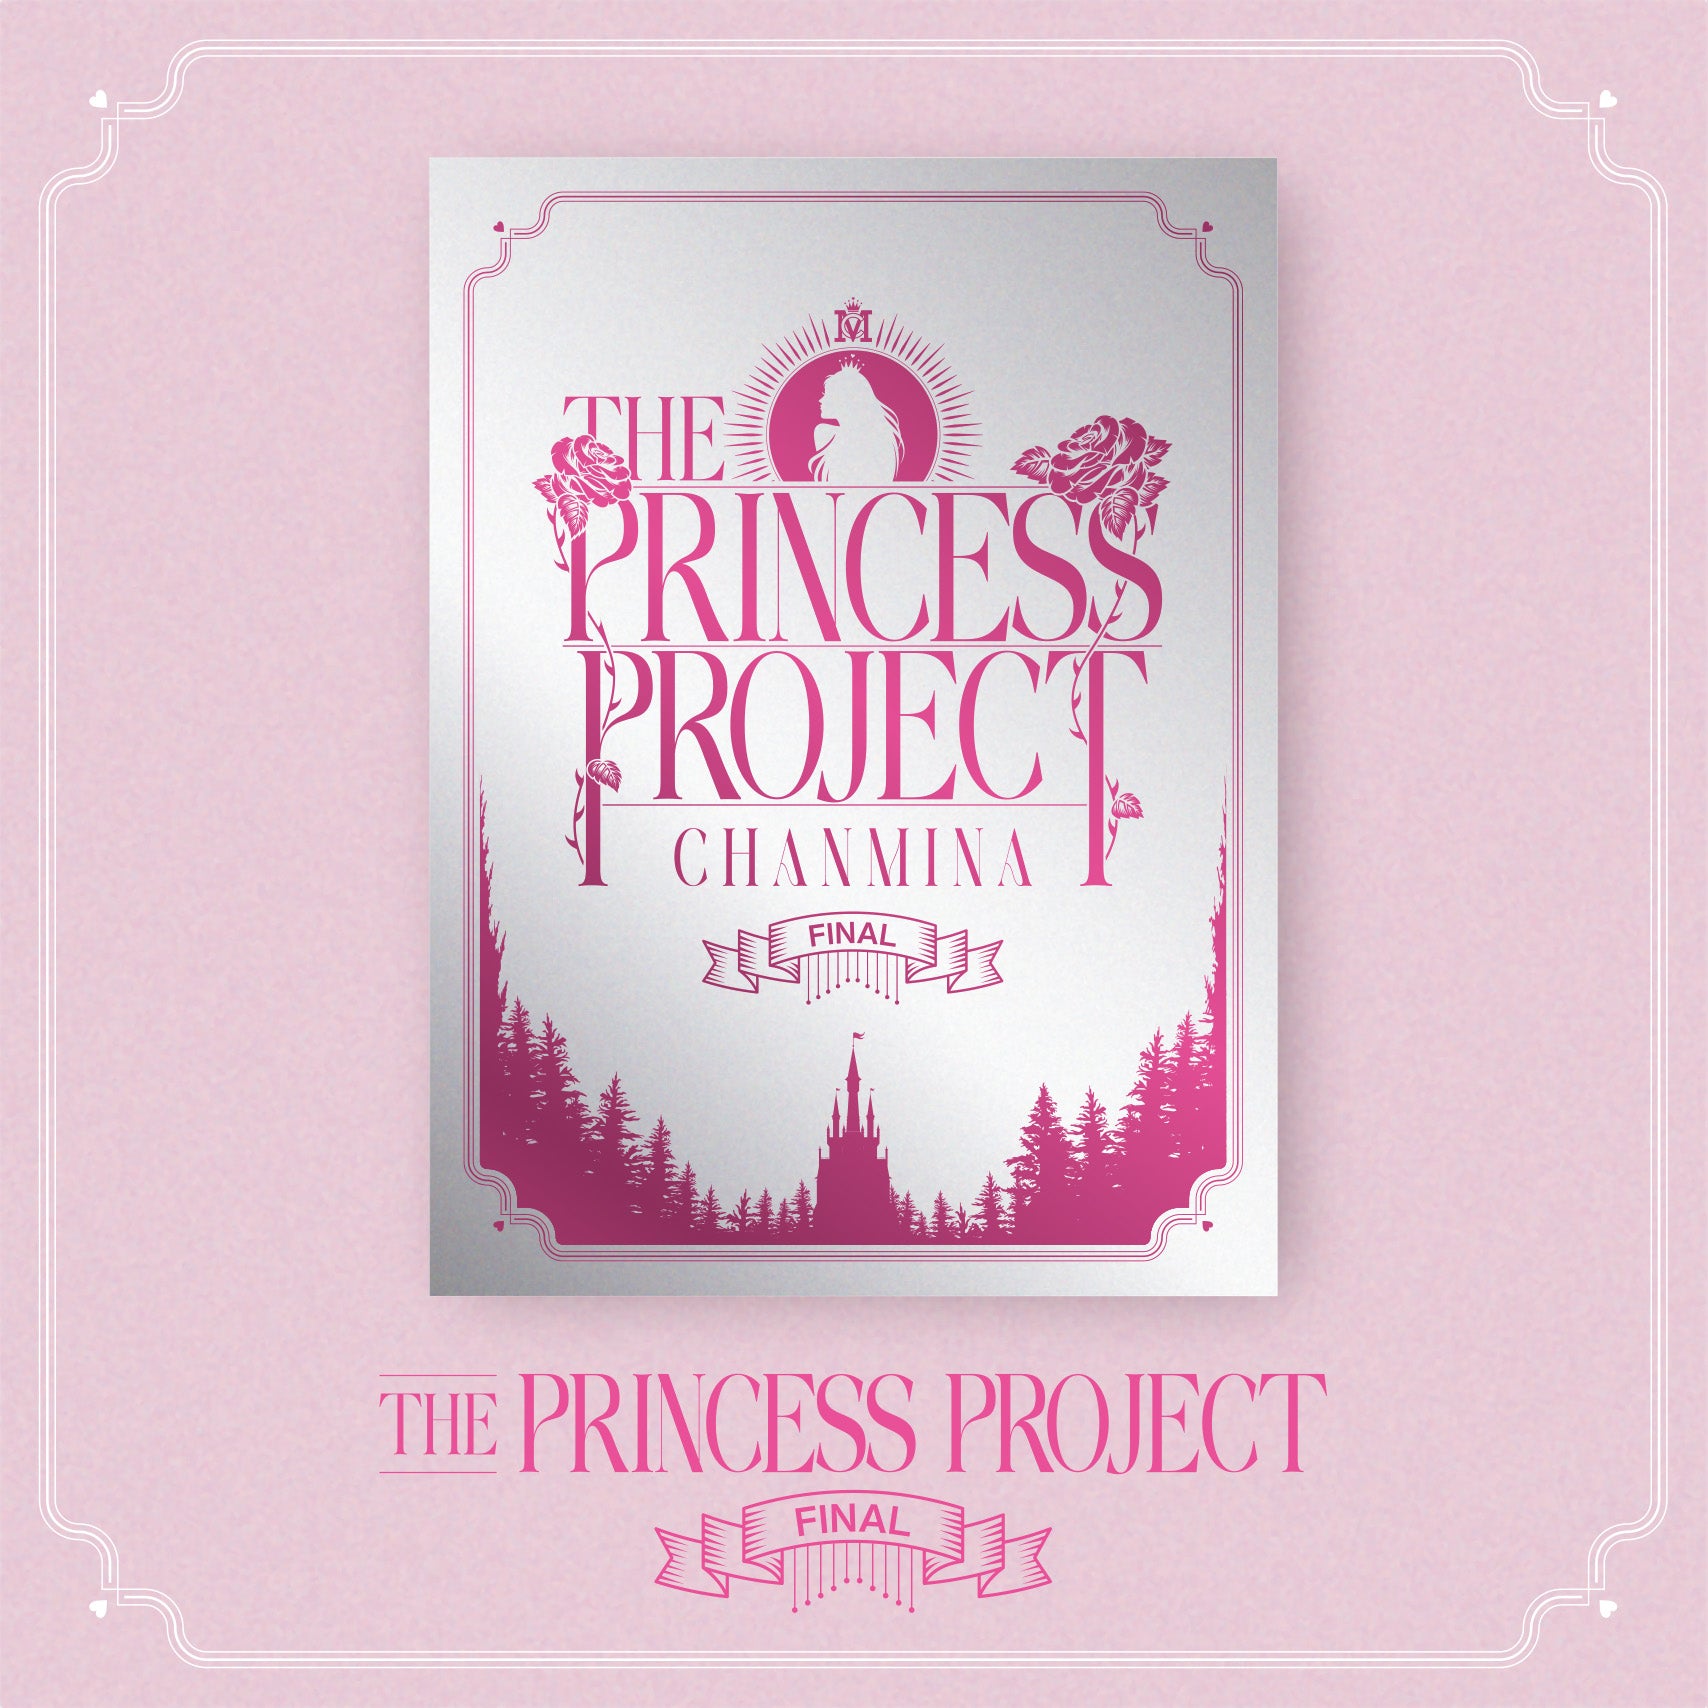 PROJECT　THE　PRINCESS　–　FINAL　DVD　ワーナーミュージック・ストア